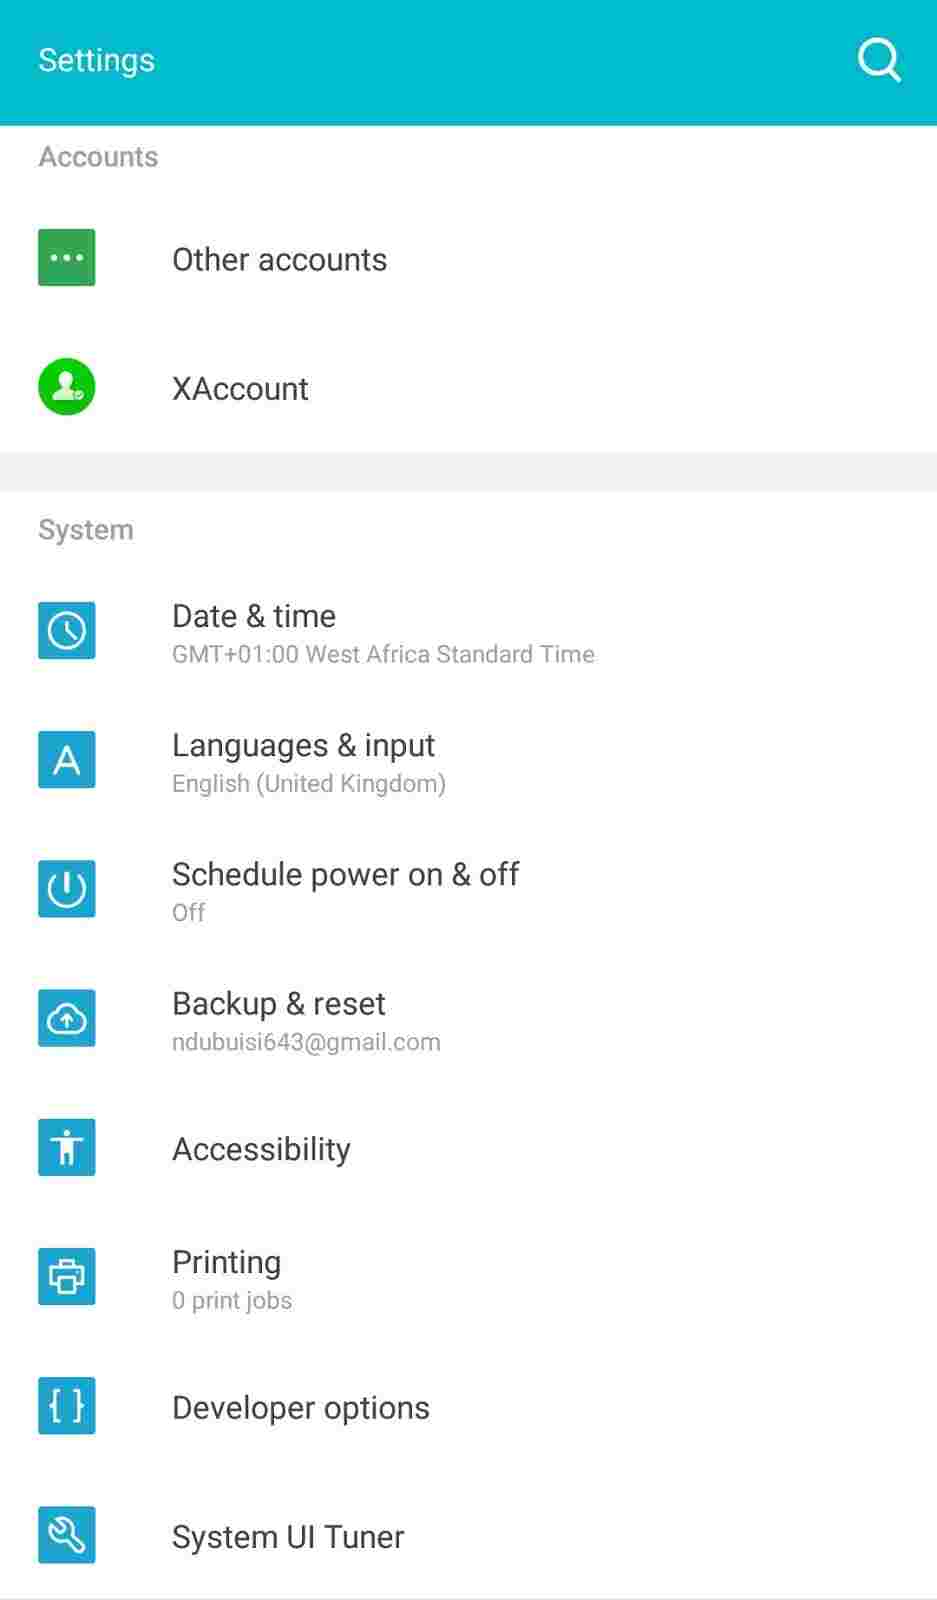 How To Quickly Setup System UI Tuner On Android Marshmallow/Nougat Devices In 2mins